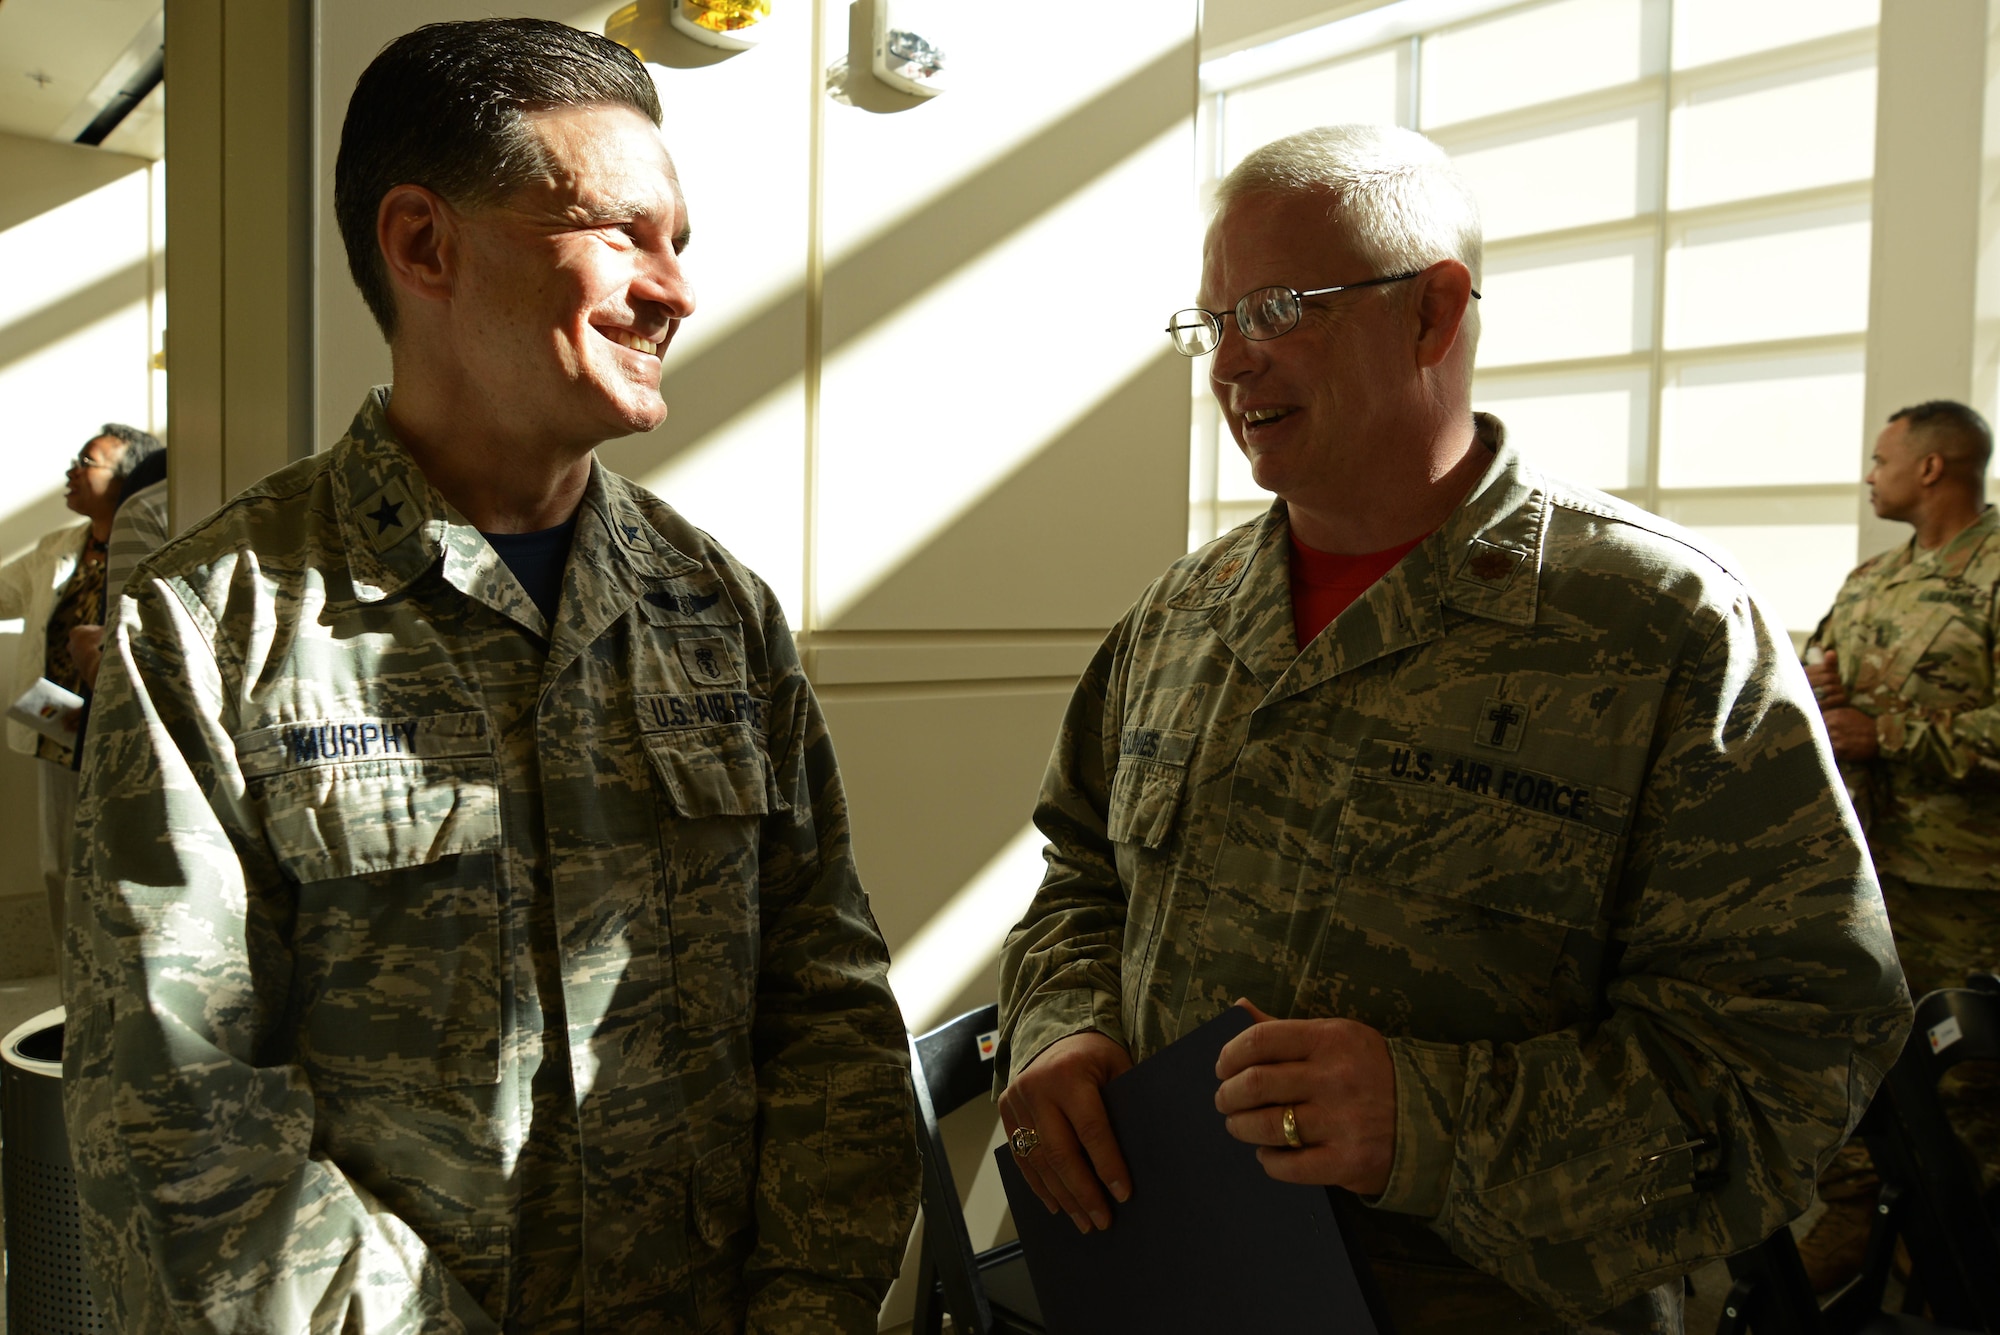 U.S. Air Force Brig. Gen. (Dr.) Sean Murphy, Air Combat Command surgeon general, left, and Chaplain (Maj.) Richard Holmes, 20th Fighter Wing deputy chaplain, right, converse after a ribbon cutting ceremony for the new 20th Medical Group clinic at Shaw Air Force Base, S.C., Feb. 24, 2017. Holmes participated in the ceremony by giving the invocation. (U.S. Air Force photo by Airman 1st Class Kathryn R.C. Reaves)